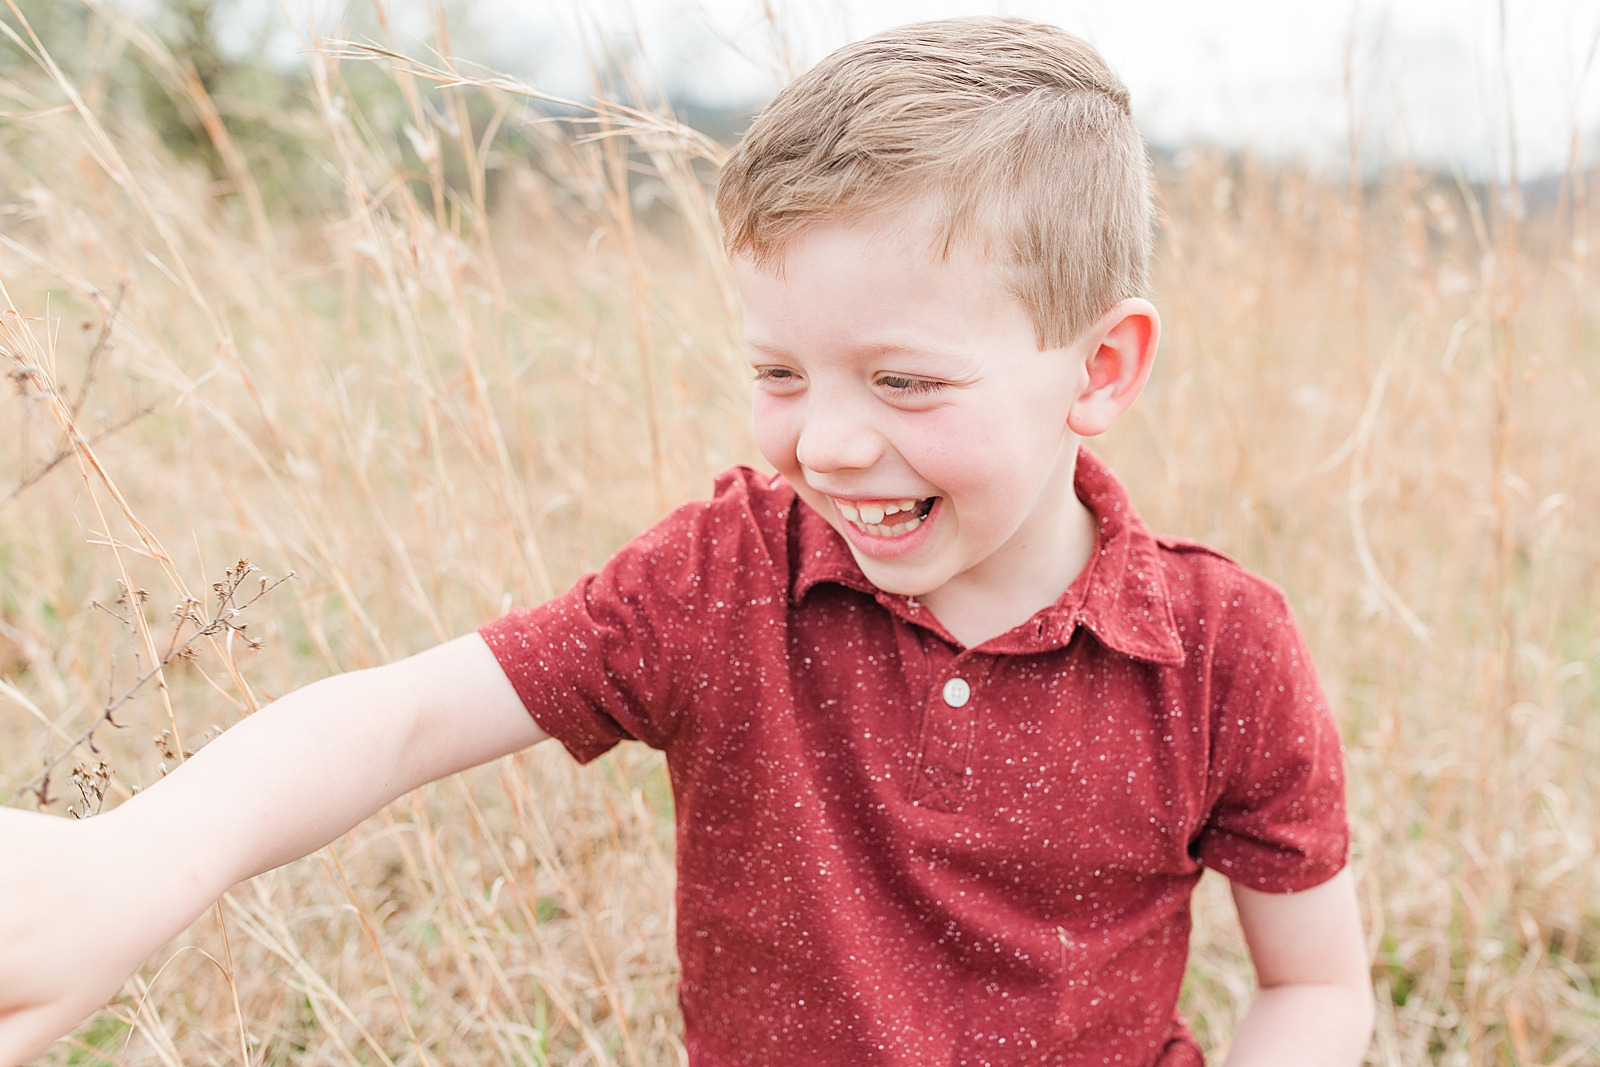 Asheville Photographer's Family Little boy in red shirt laughing Photo